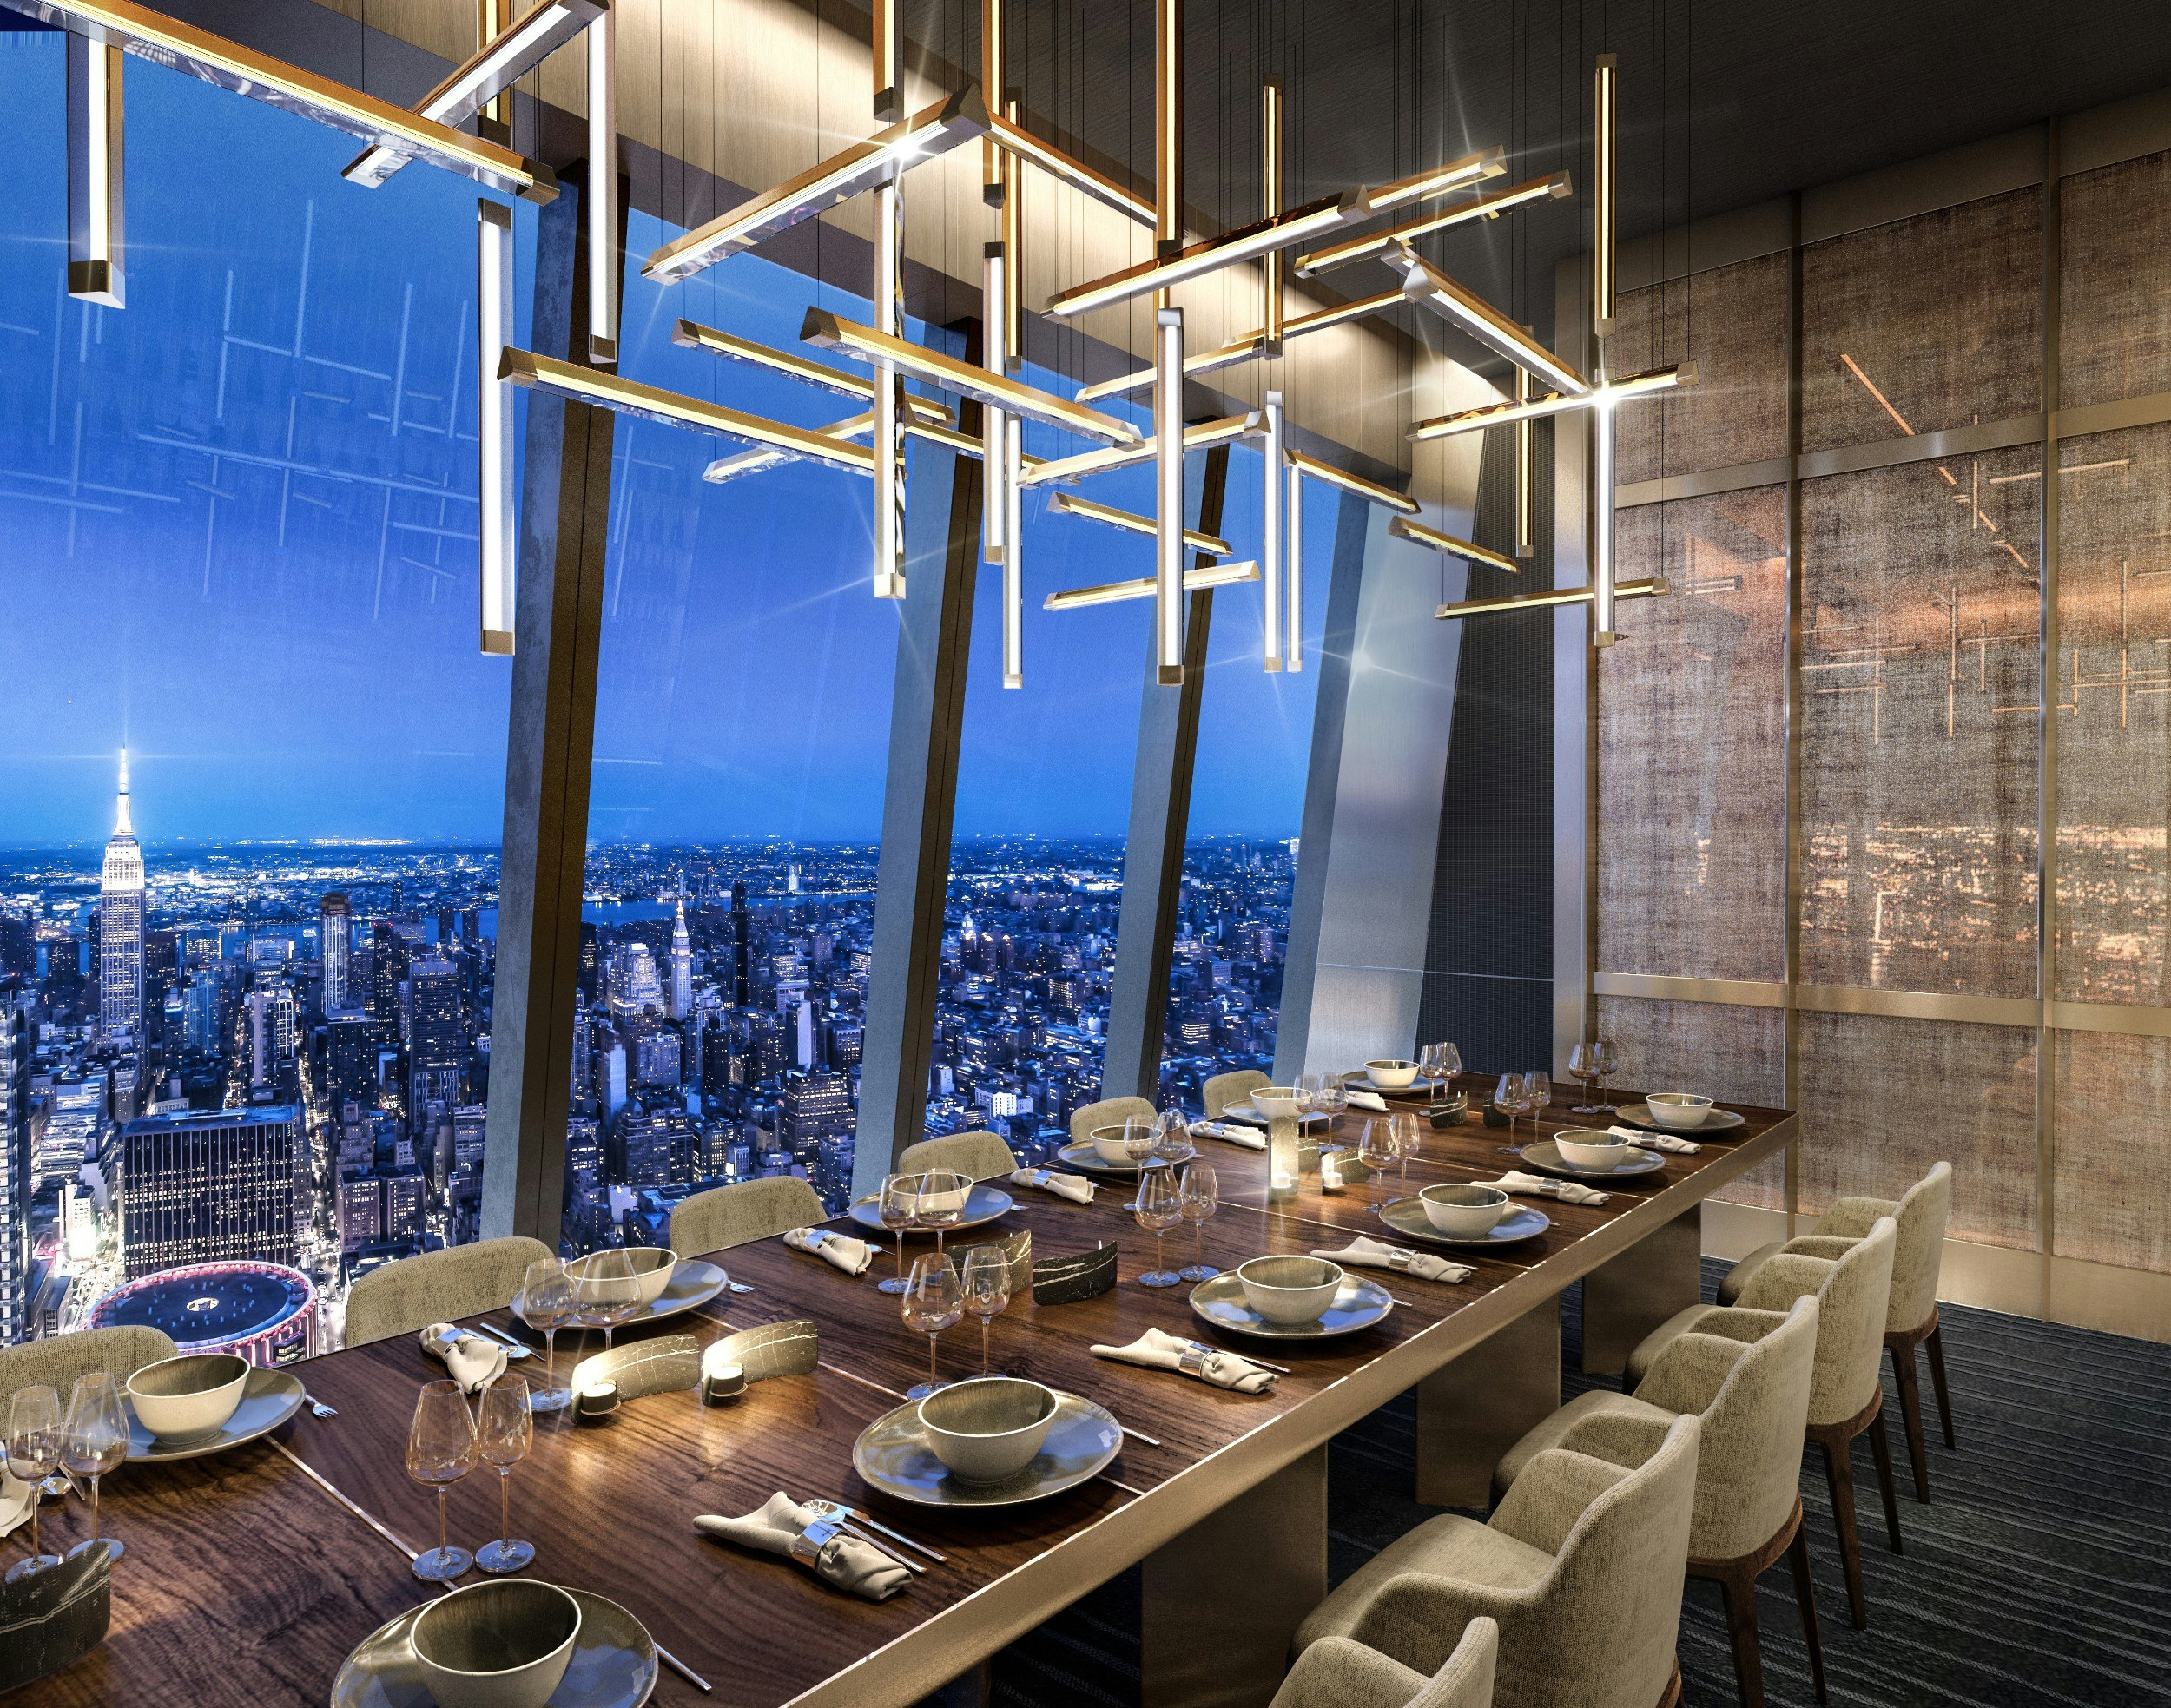 The private dining room at Peak restaurant in New York